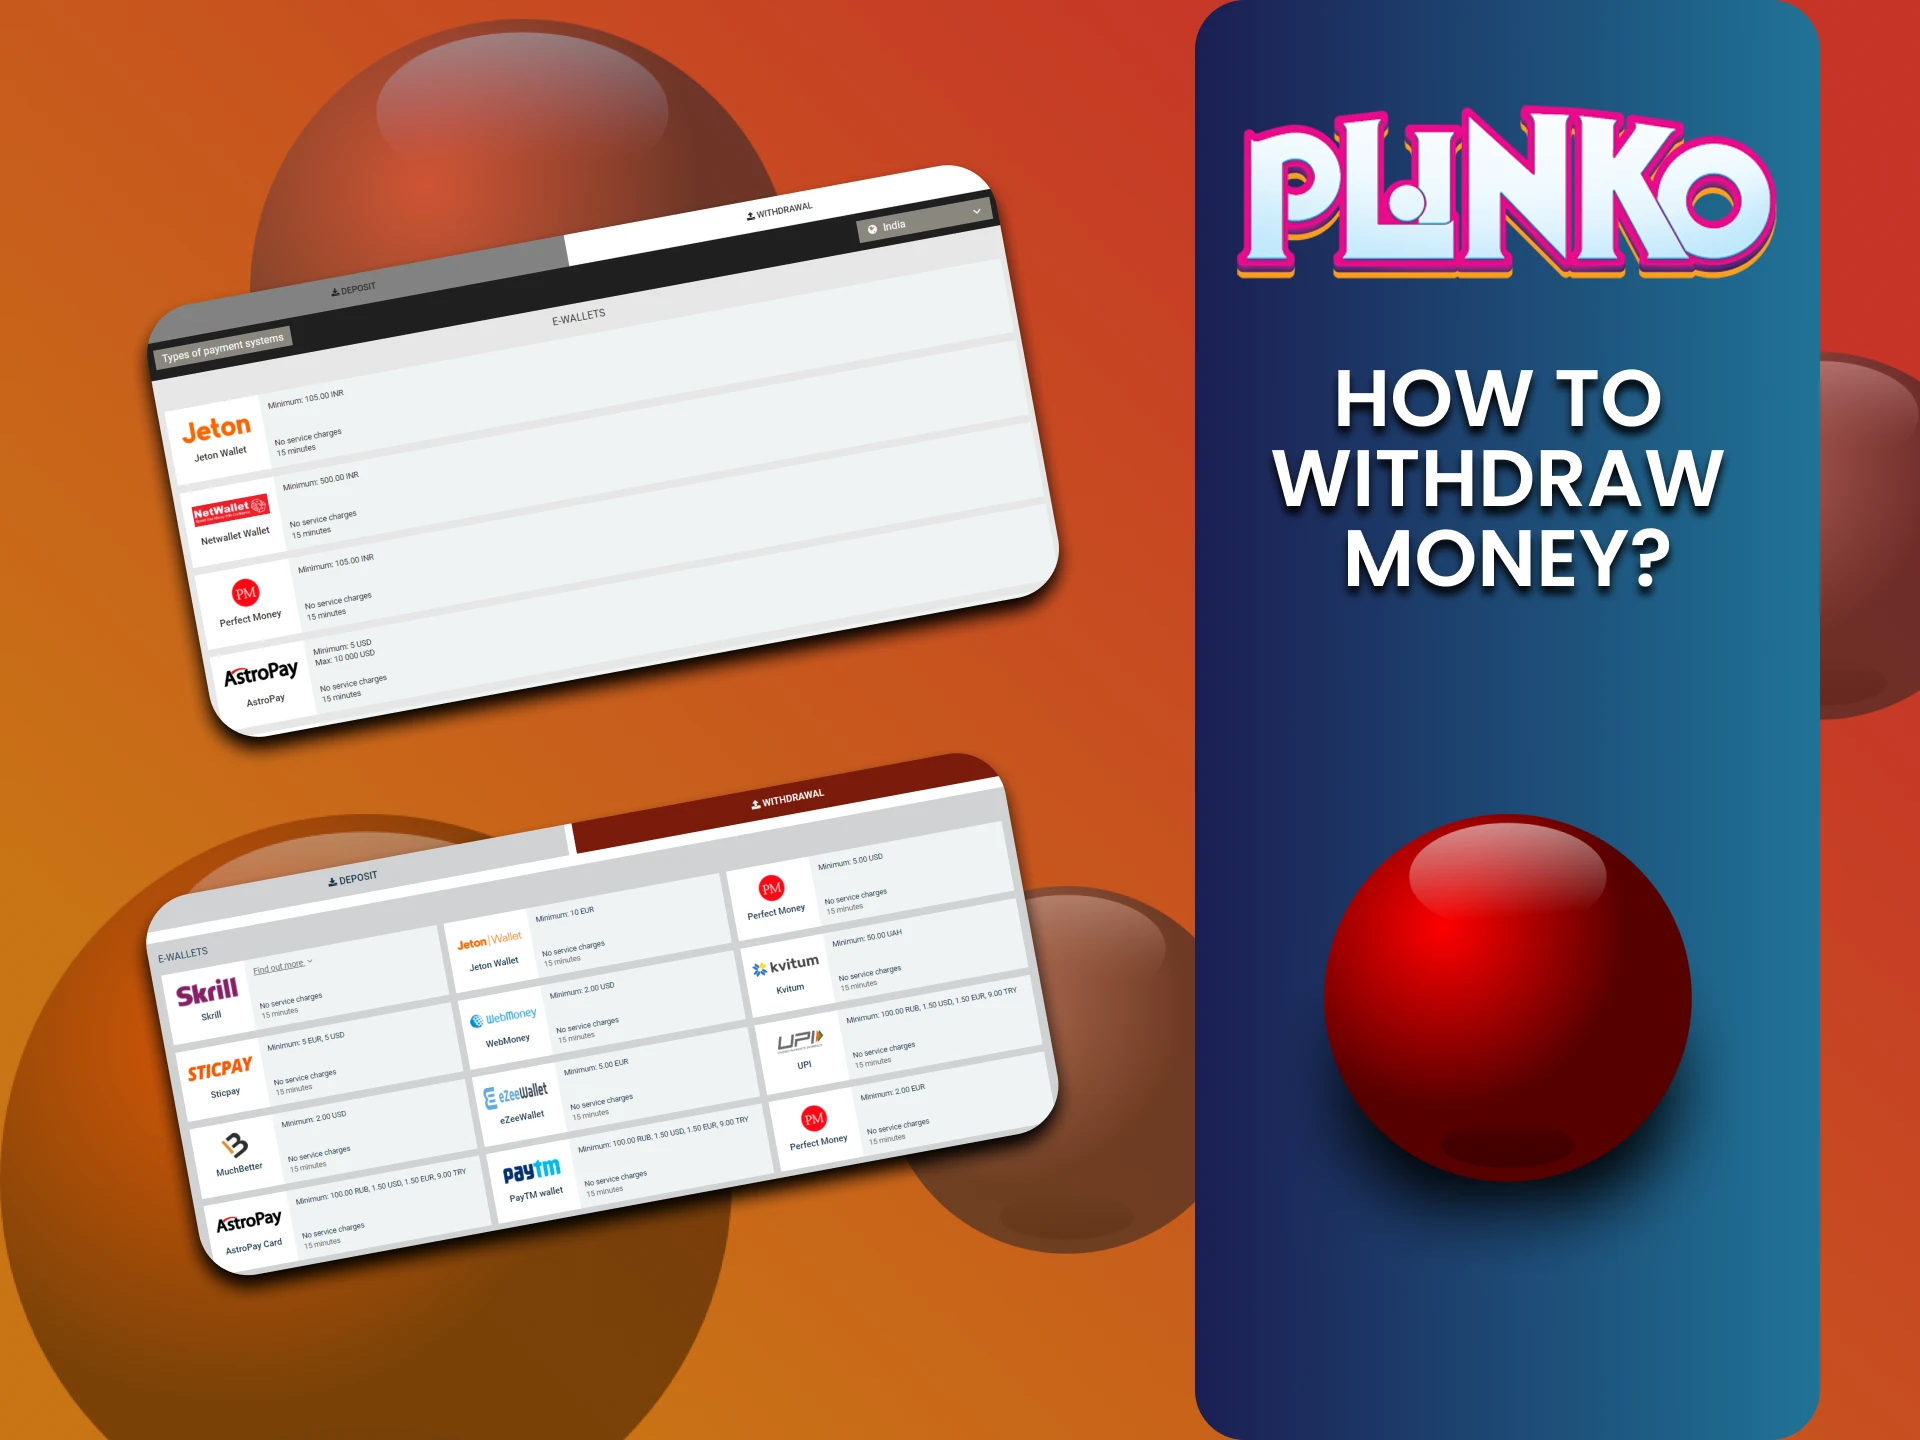 We will tell you how to withdraw funds for the game Plinko.